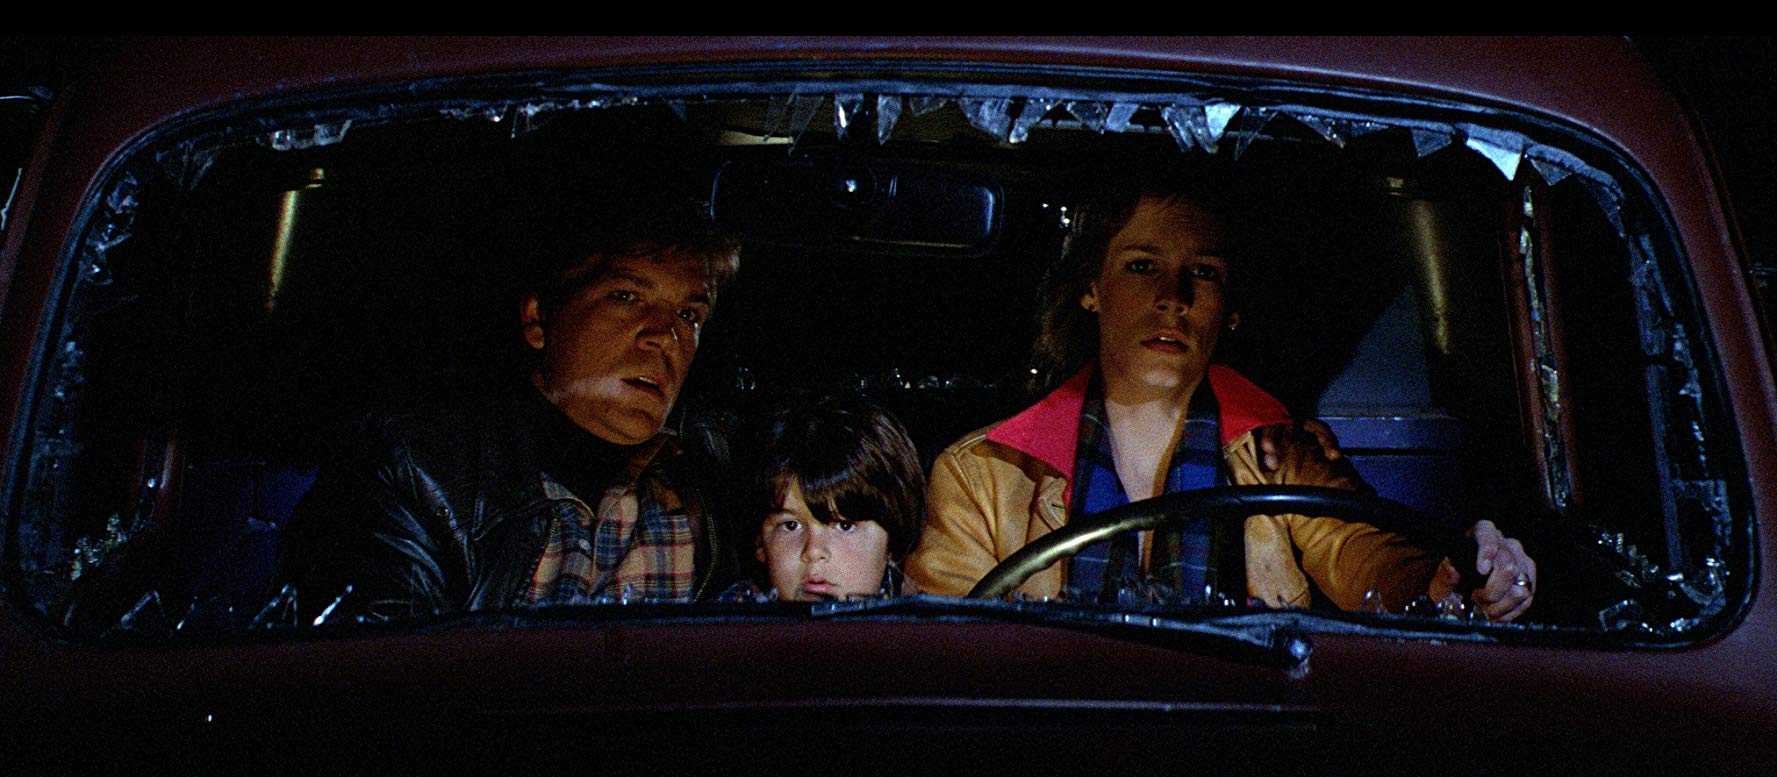 Tom Atkins, Ty Mitchell and Jamie Lee Curtis in The Fog (1980)